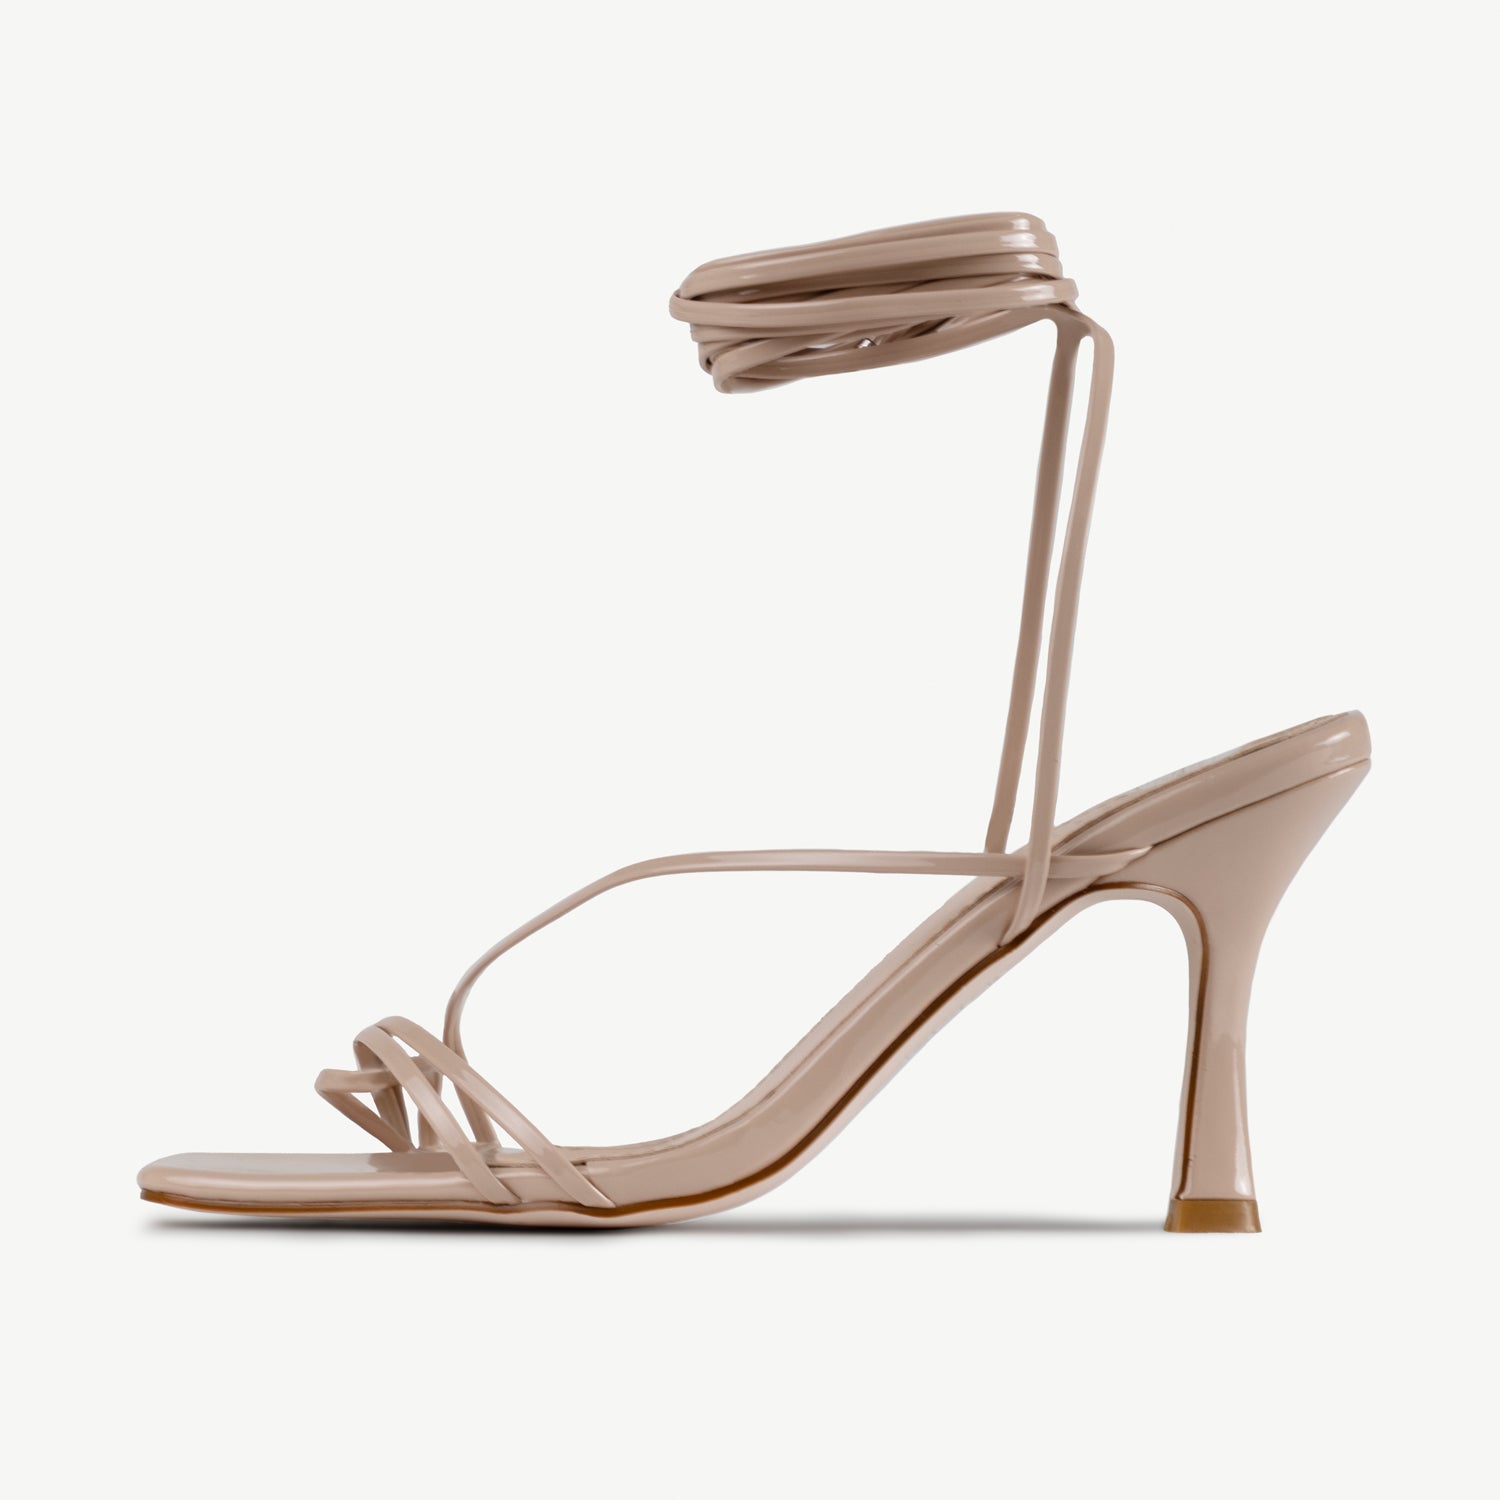 RAID Fane Lace-up Heeled Sandal in Nude Patent